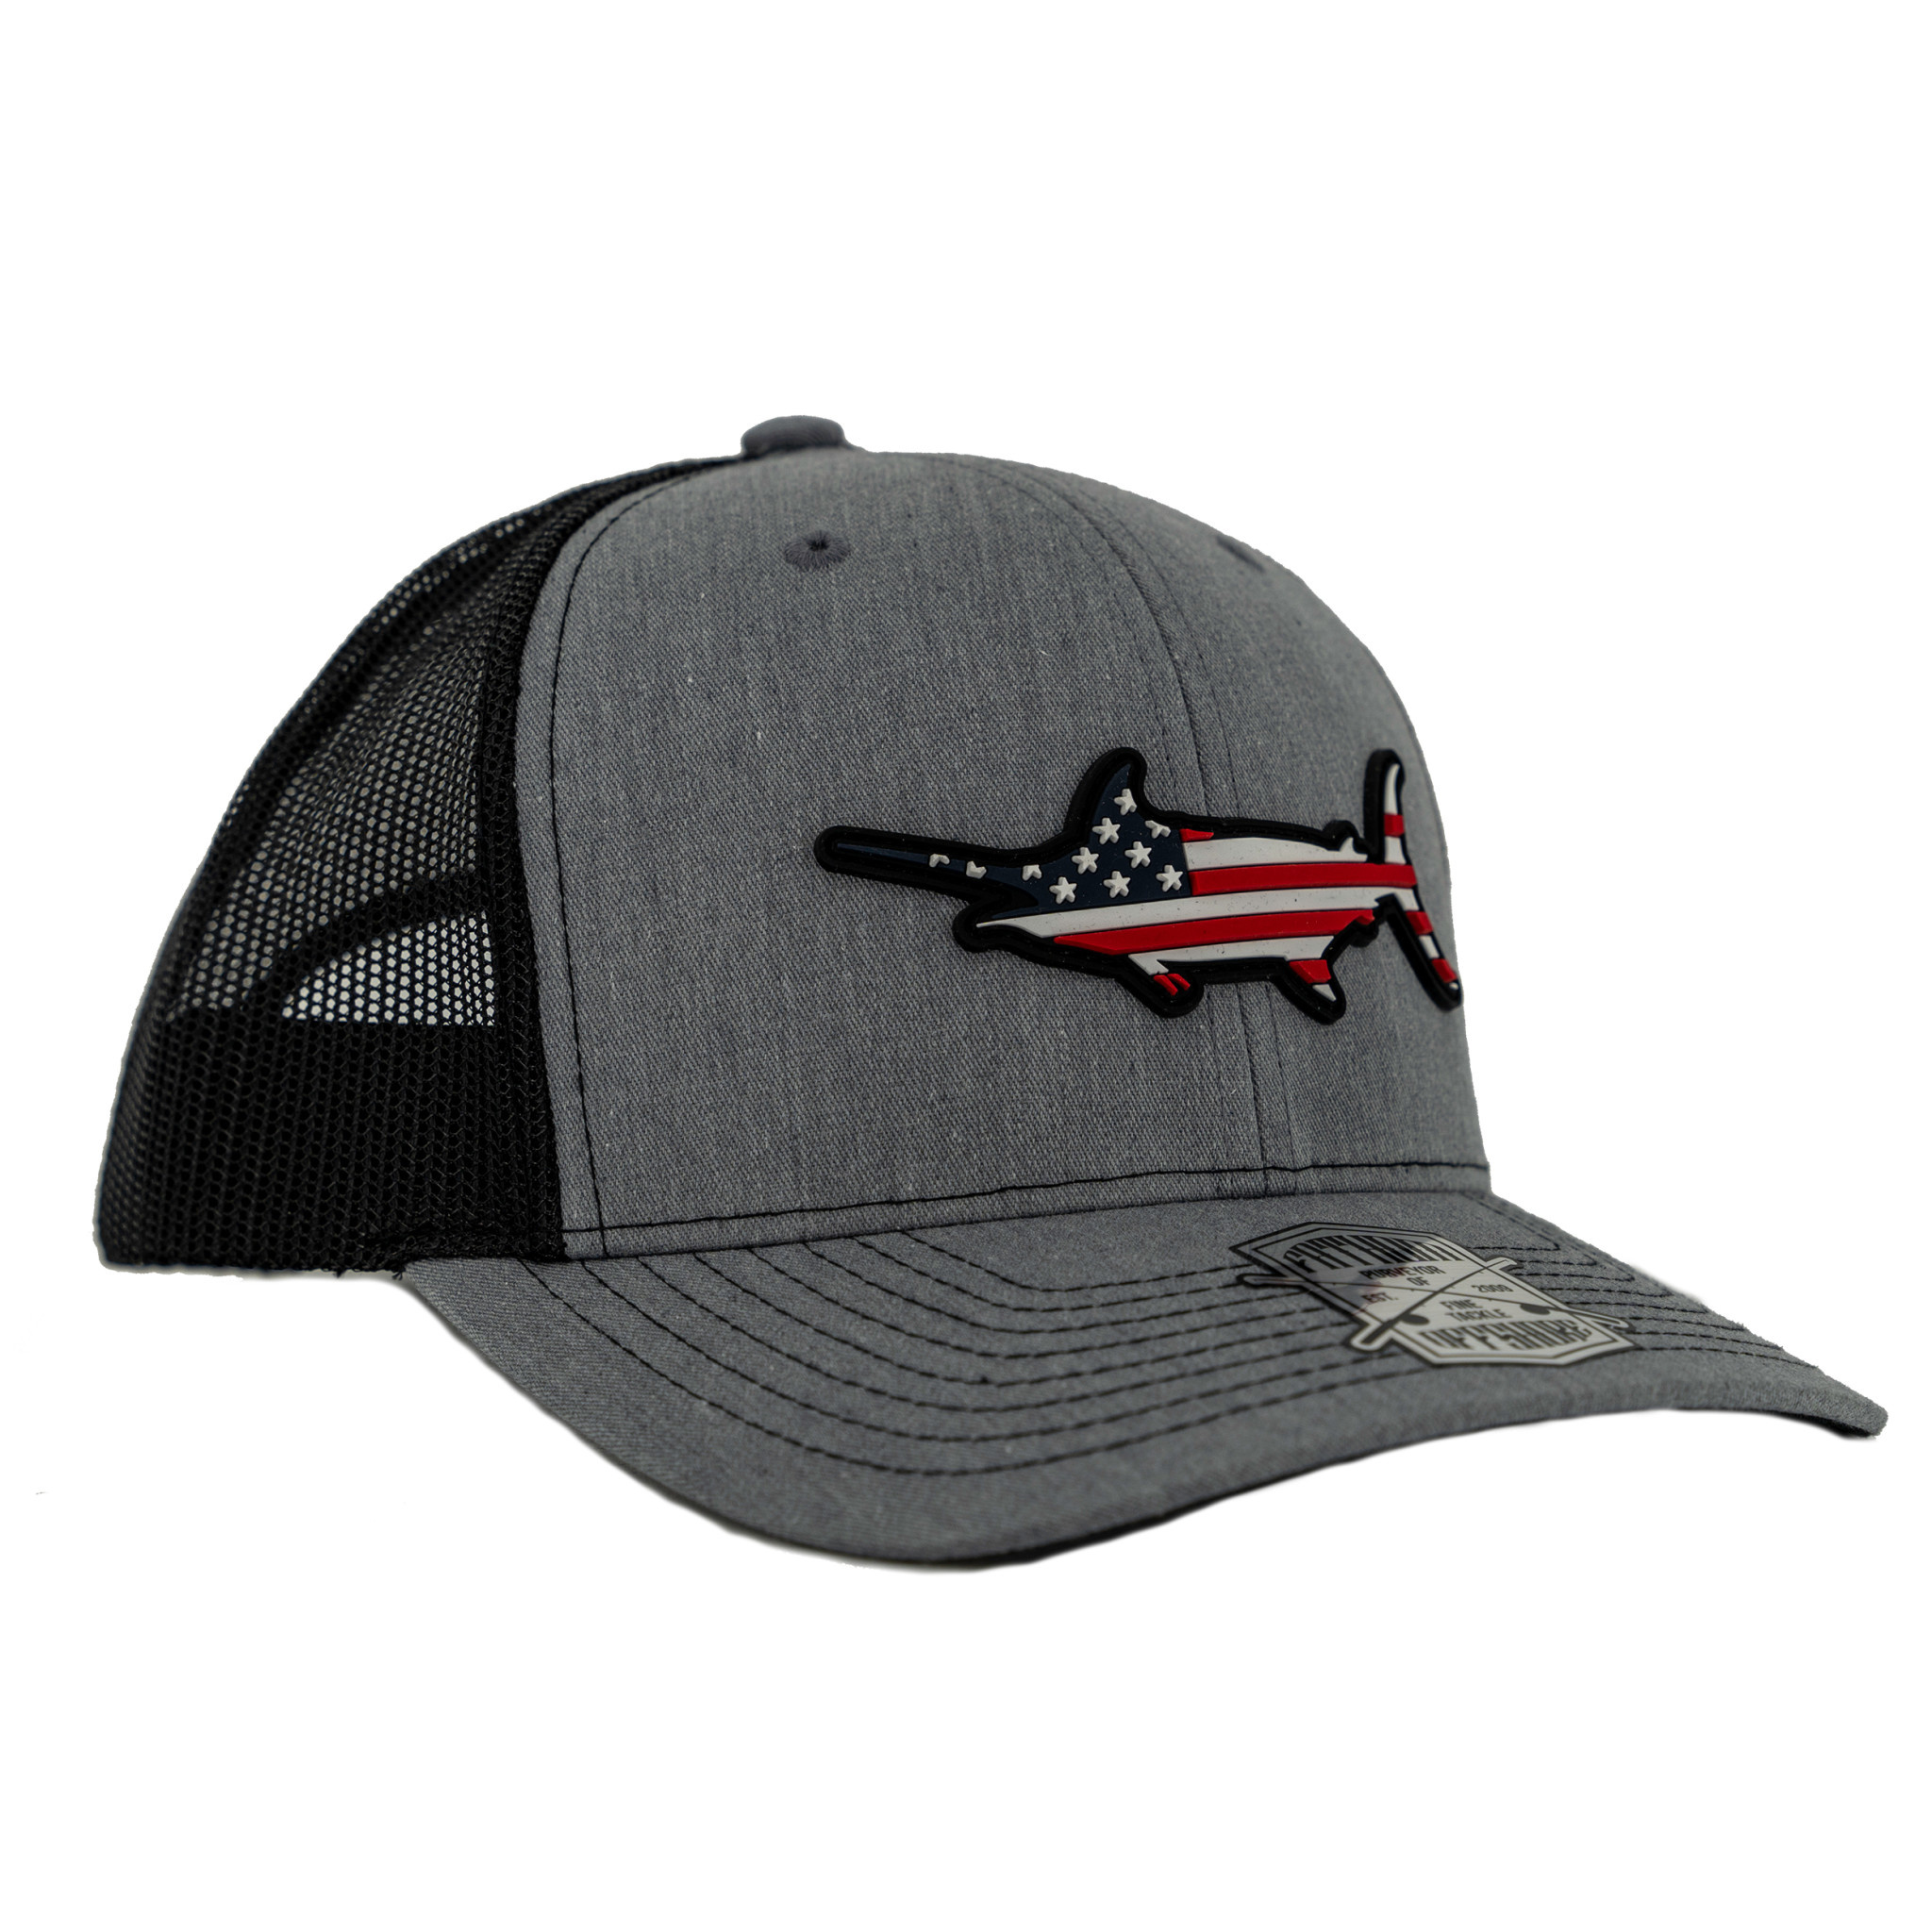 Fathom Offshore Stars and Bars Truckers Cap Charcoal